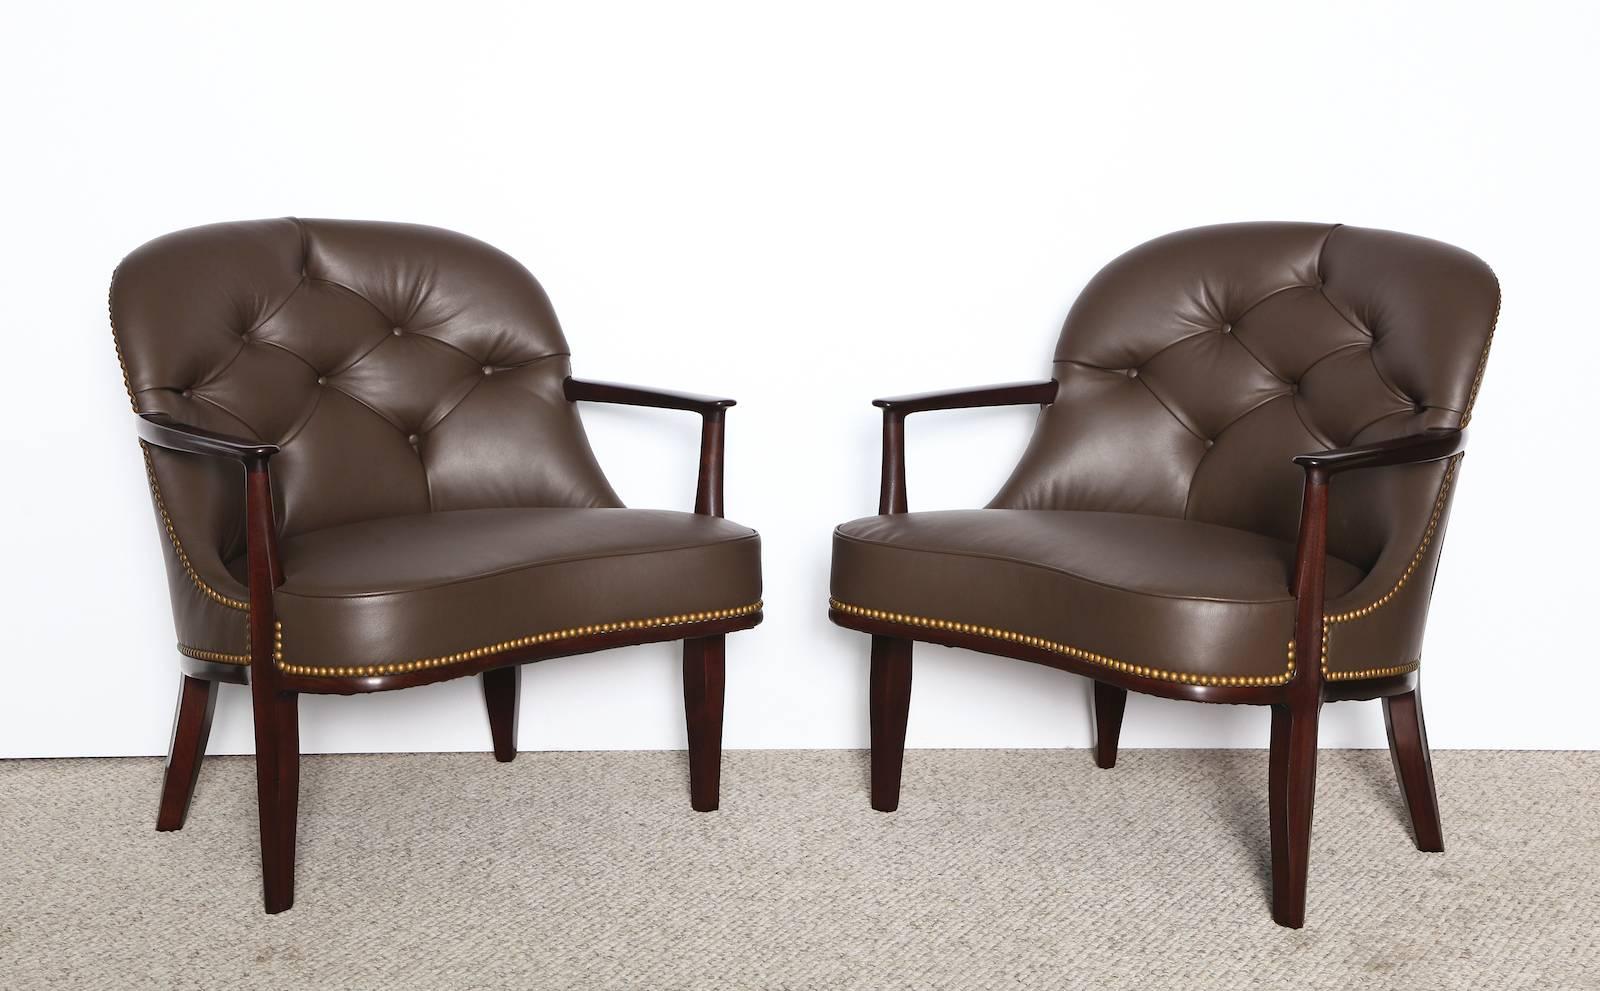 Mid-Century Modern Pair of Low Lounge Chairs #5705 Edward Wormley for Dunbar